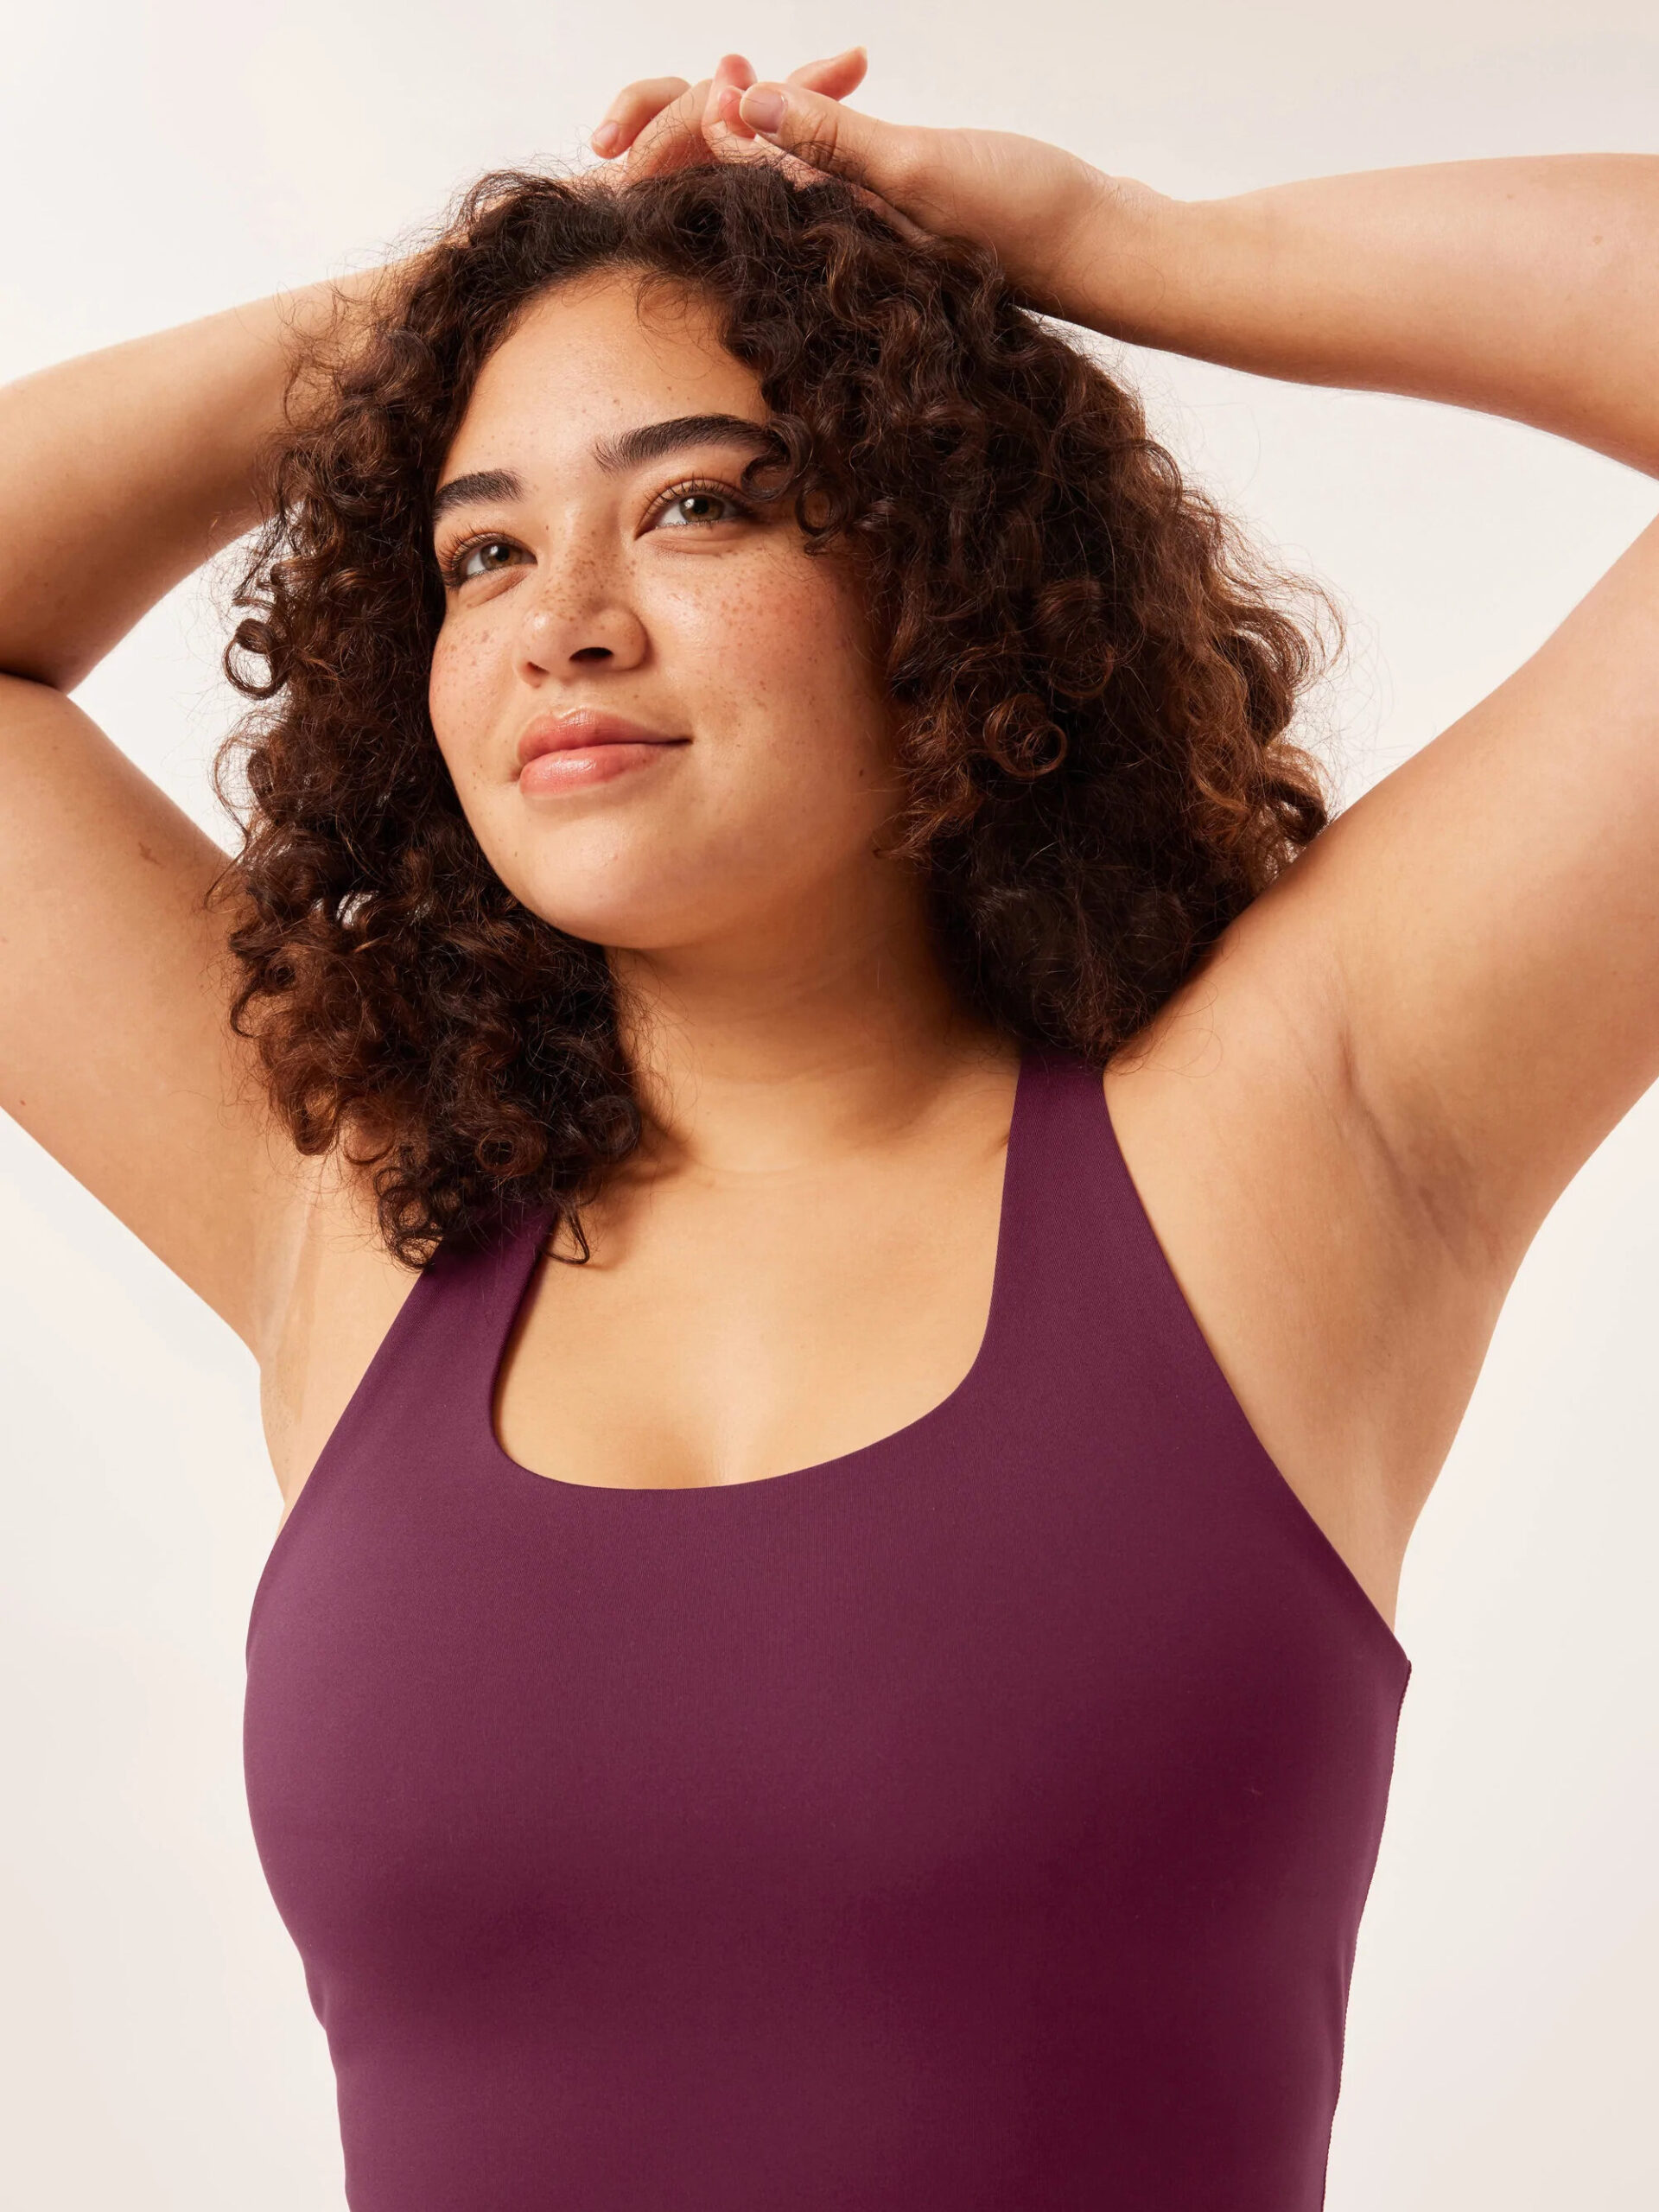 Model wearing a plum sports bra holds her arms over her head